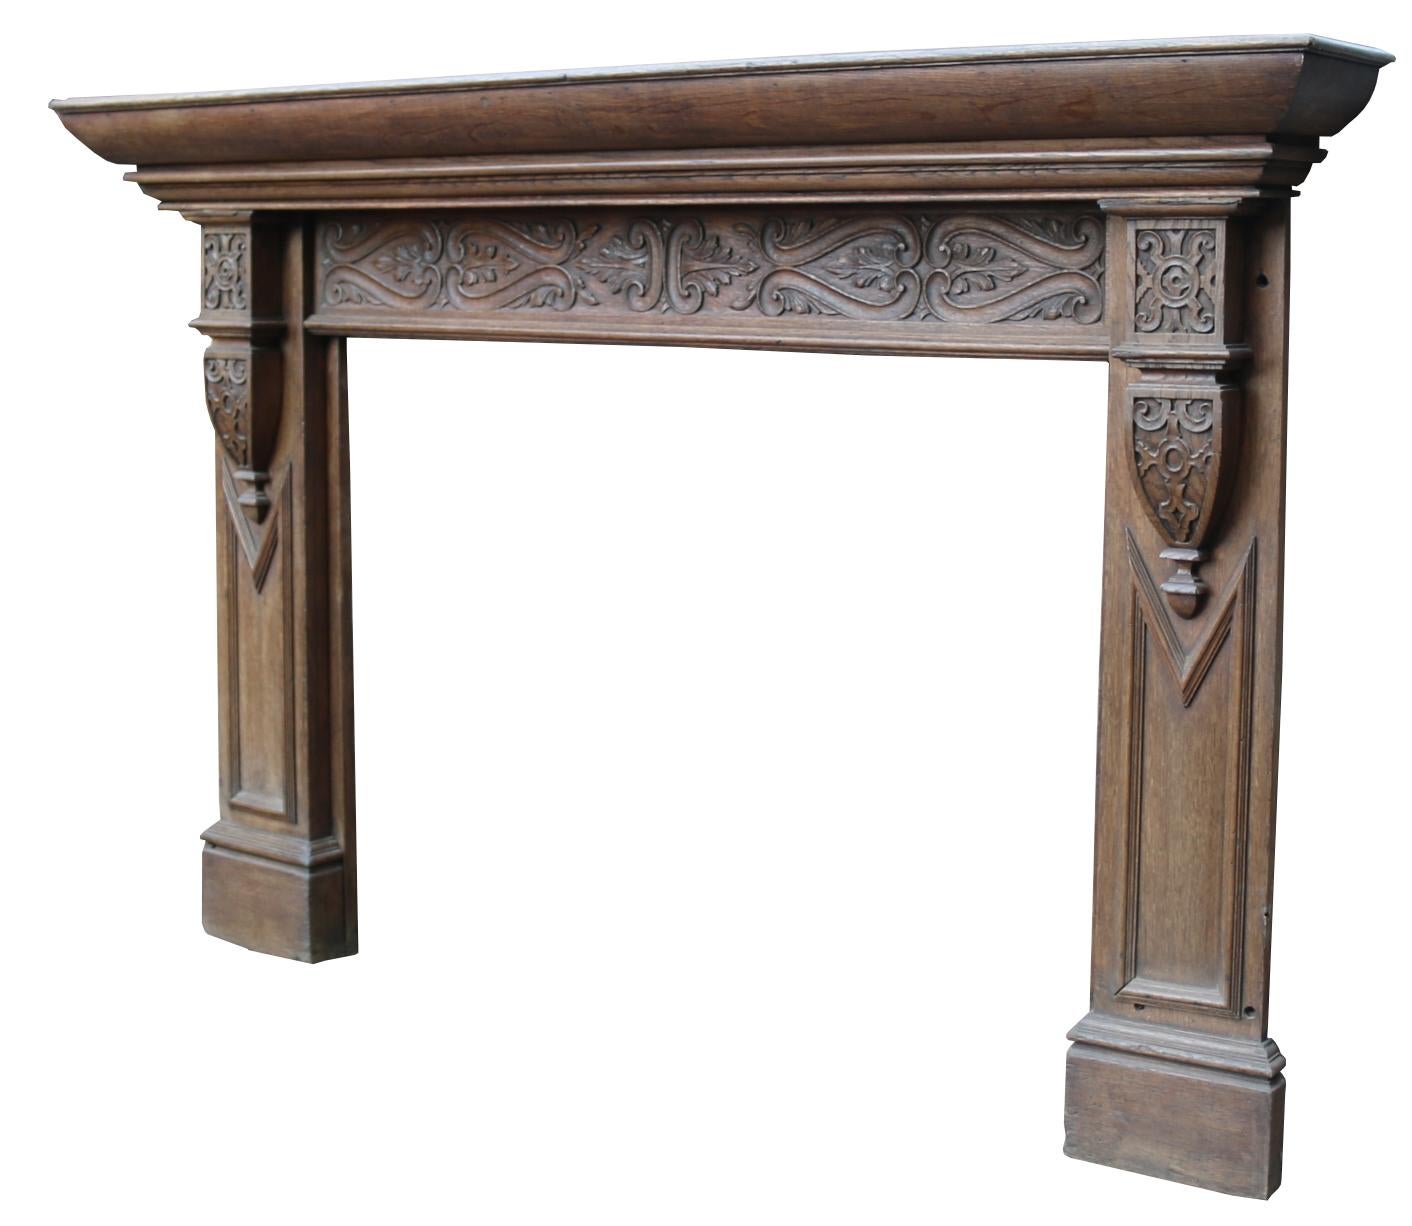 About

This beautiful English, Jacobean style fire surround is made from oak and features hand carving. Wax finish. 

Condition report

The mantel previously would have been set into a wall by 20 mm.

Style

Jacobean

Date of